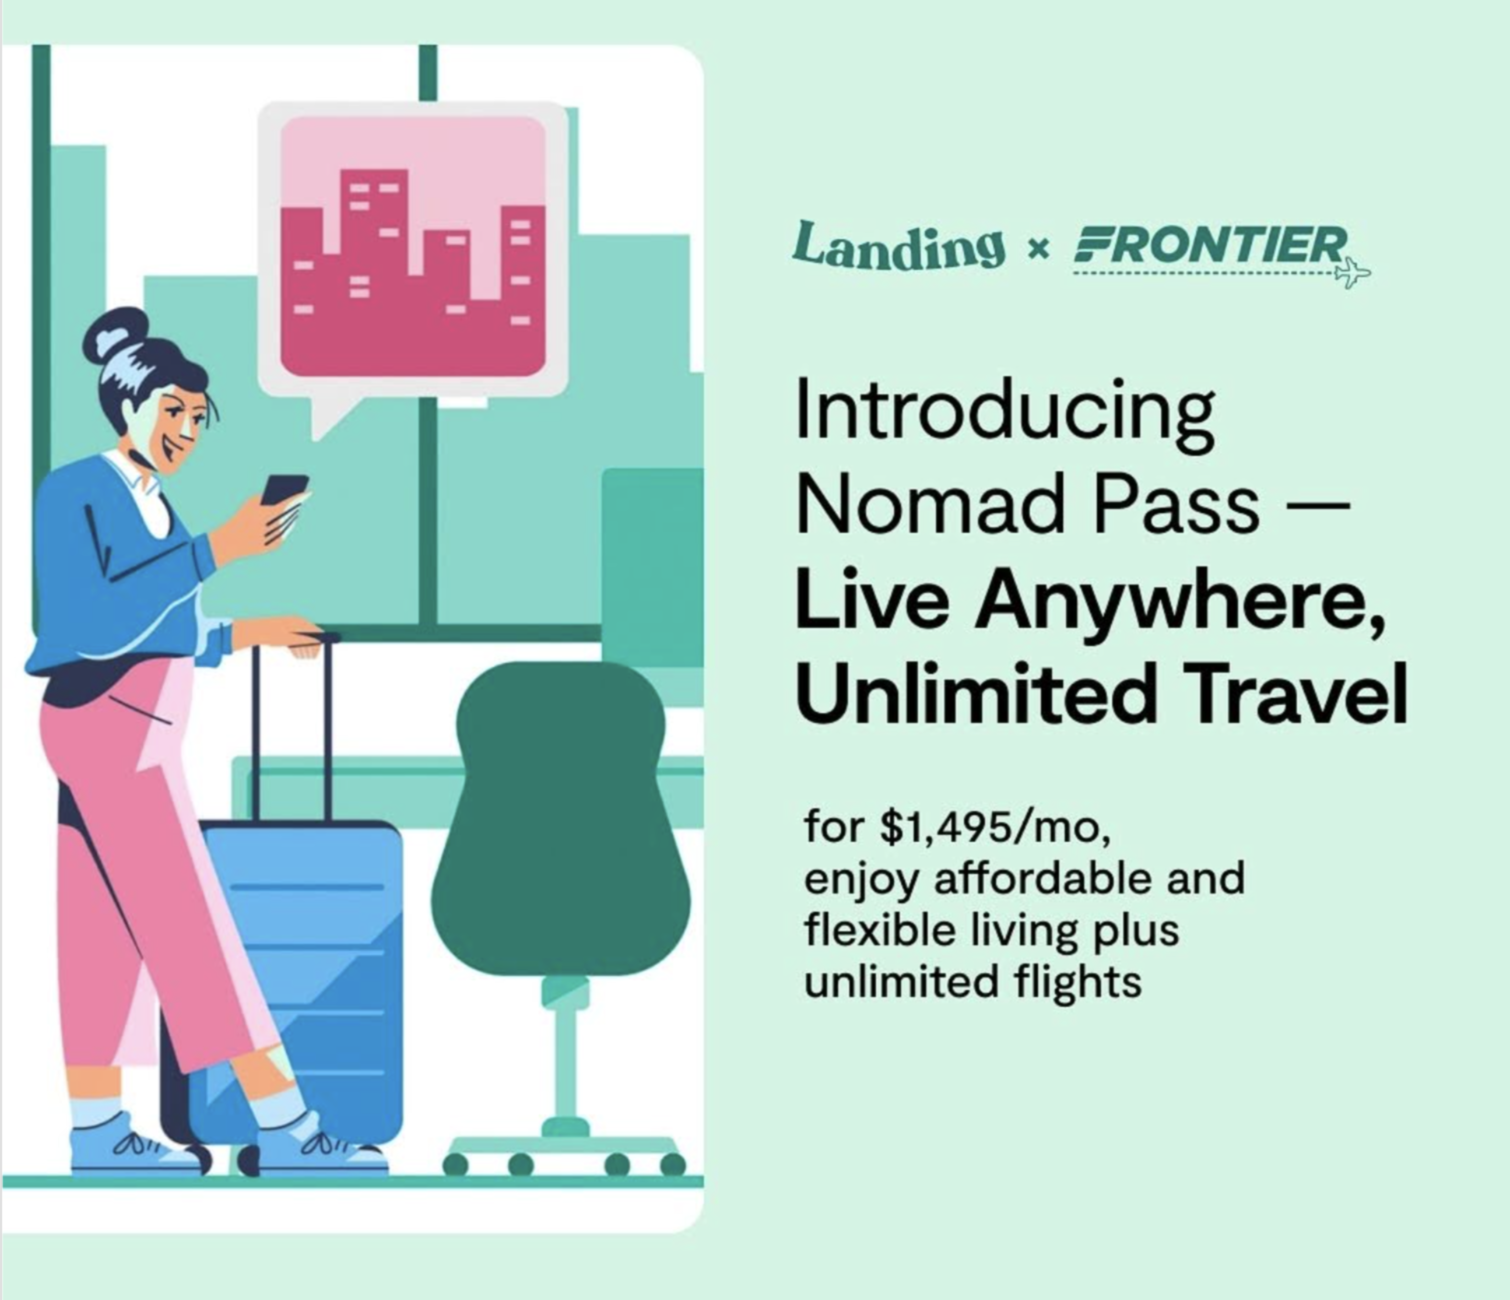 Landing Partners with Frontier: Introducing Nomad Pass